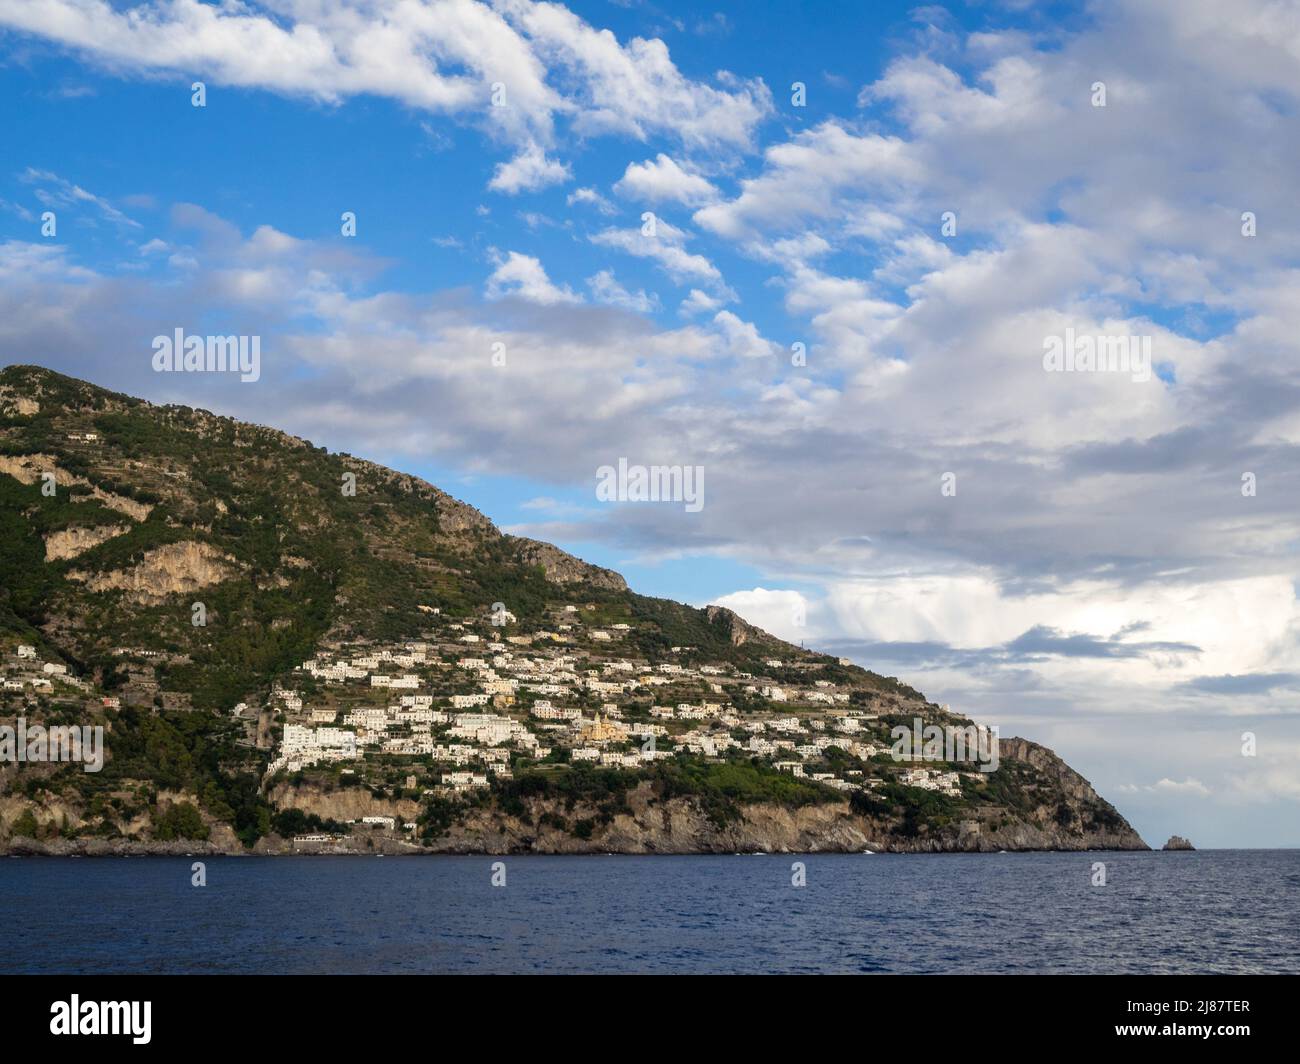 Praiano seen from the sea Stock Photo